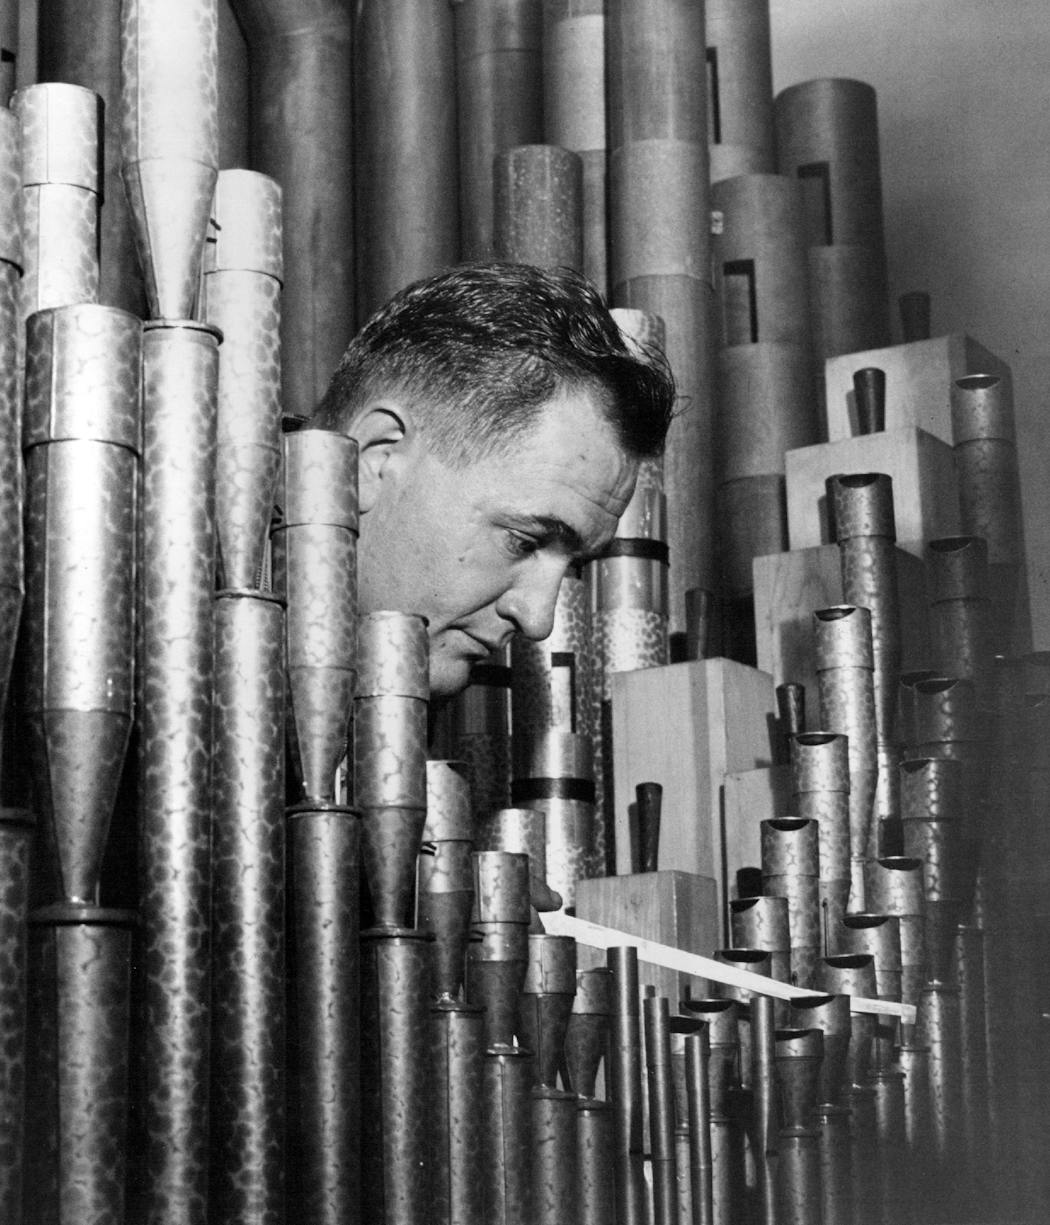 Organ tuner James Milne, Jr. works on some of the organ's 10,000 pipes in 1957.